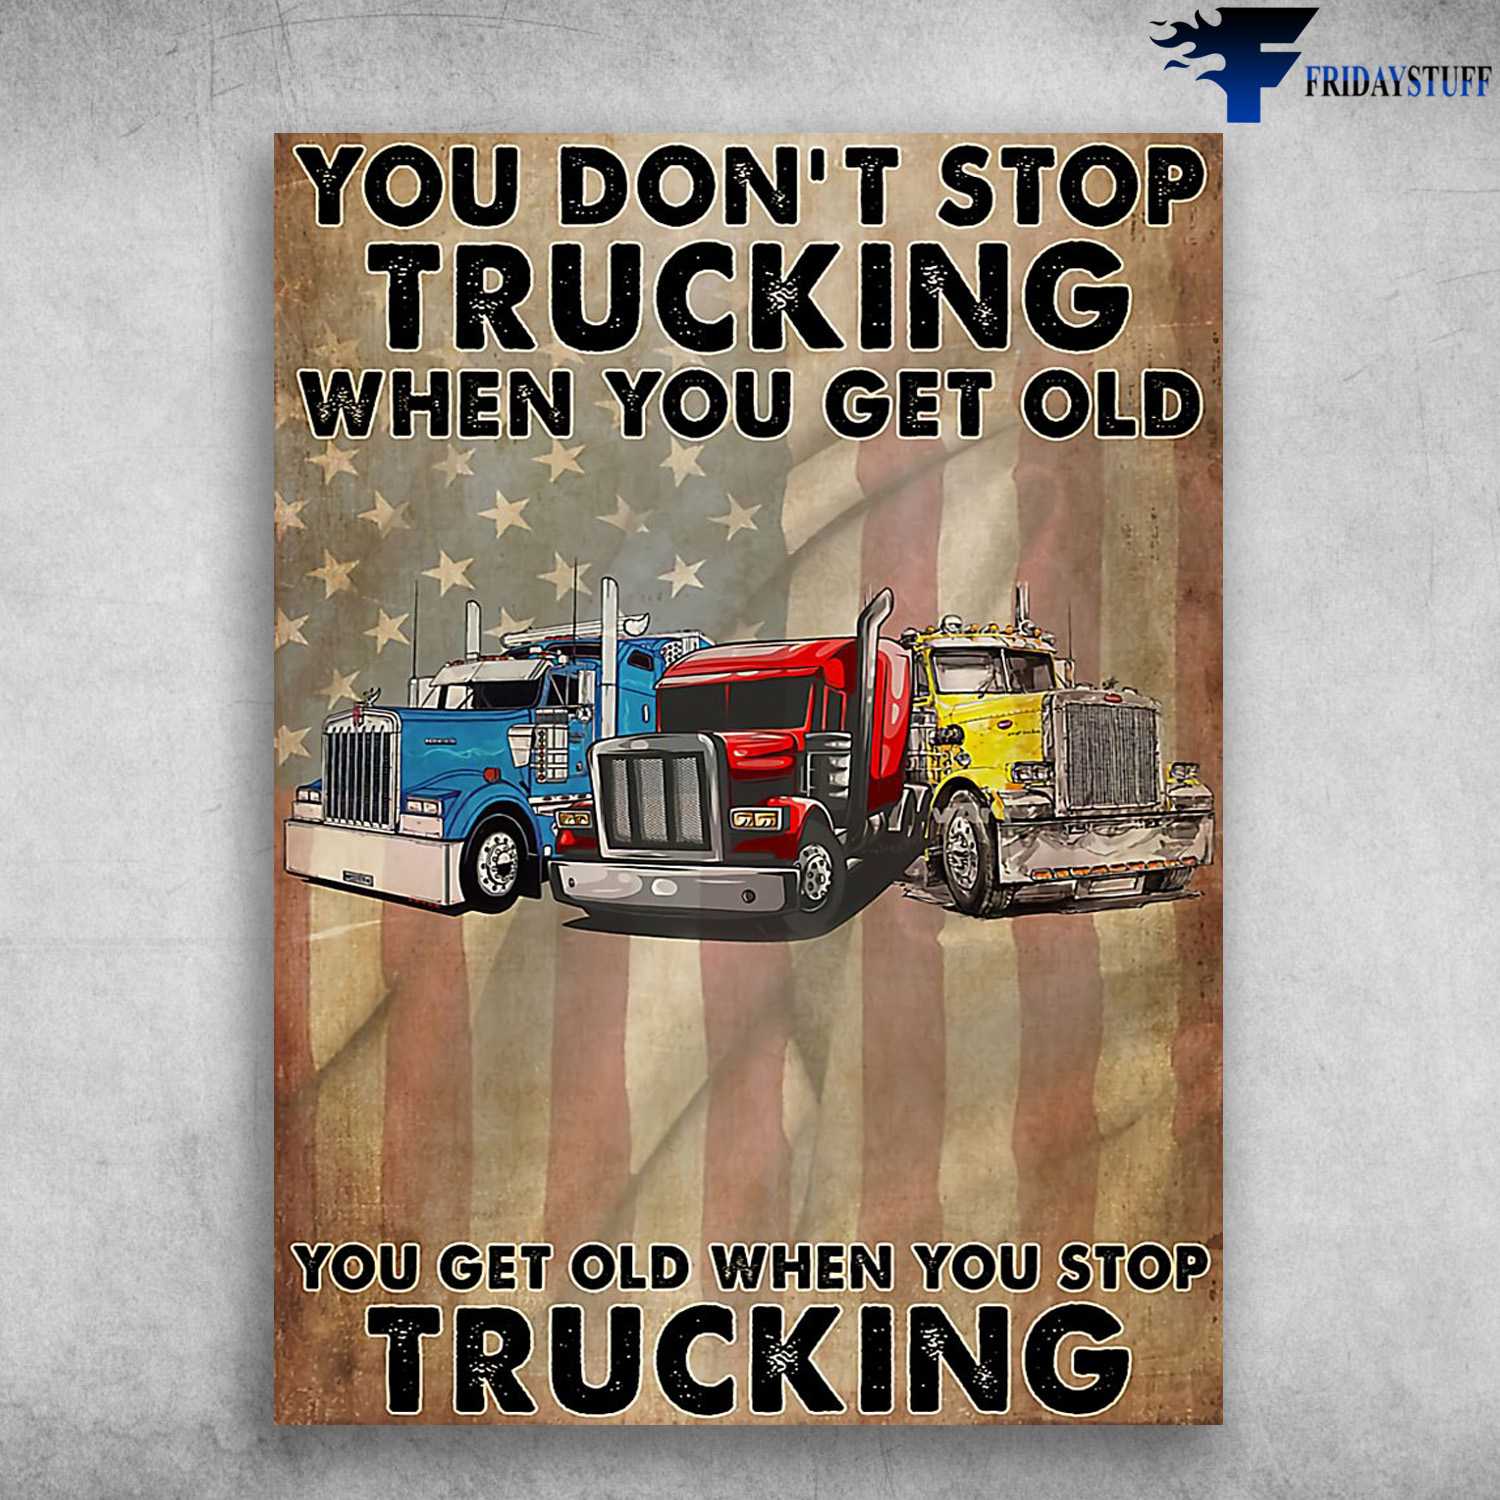 Trucker Poster, Truck Driver, You Don't Stop Trucking When You Get Old, You Get Old When You Stop Trucking